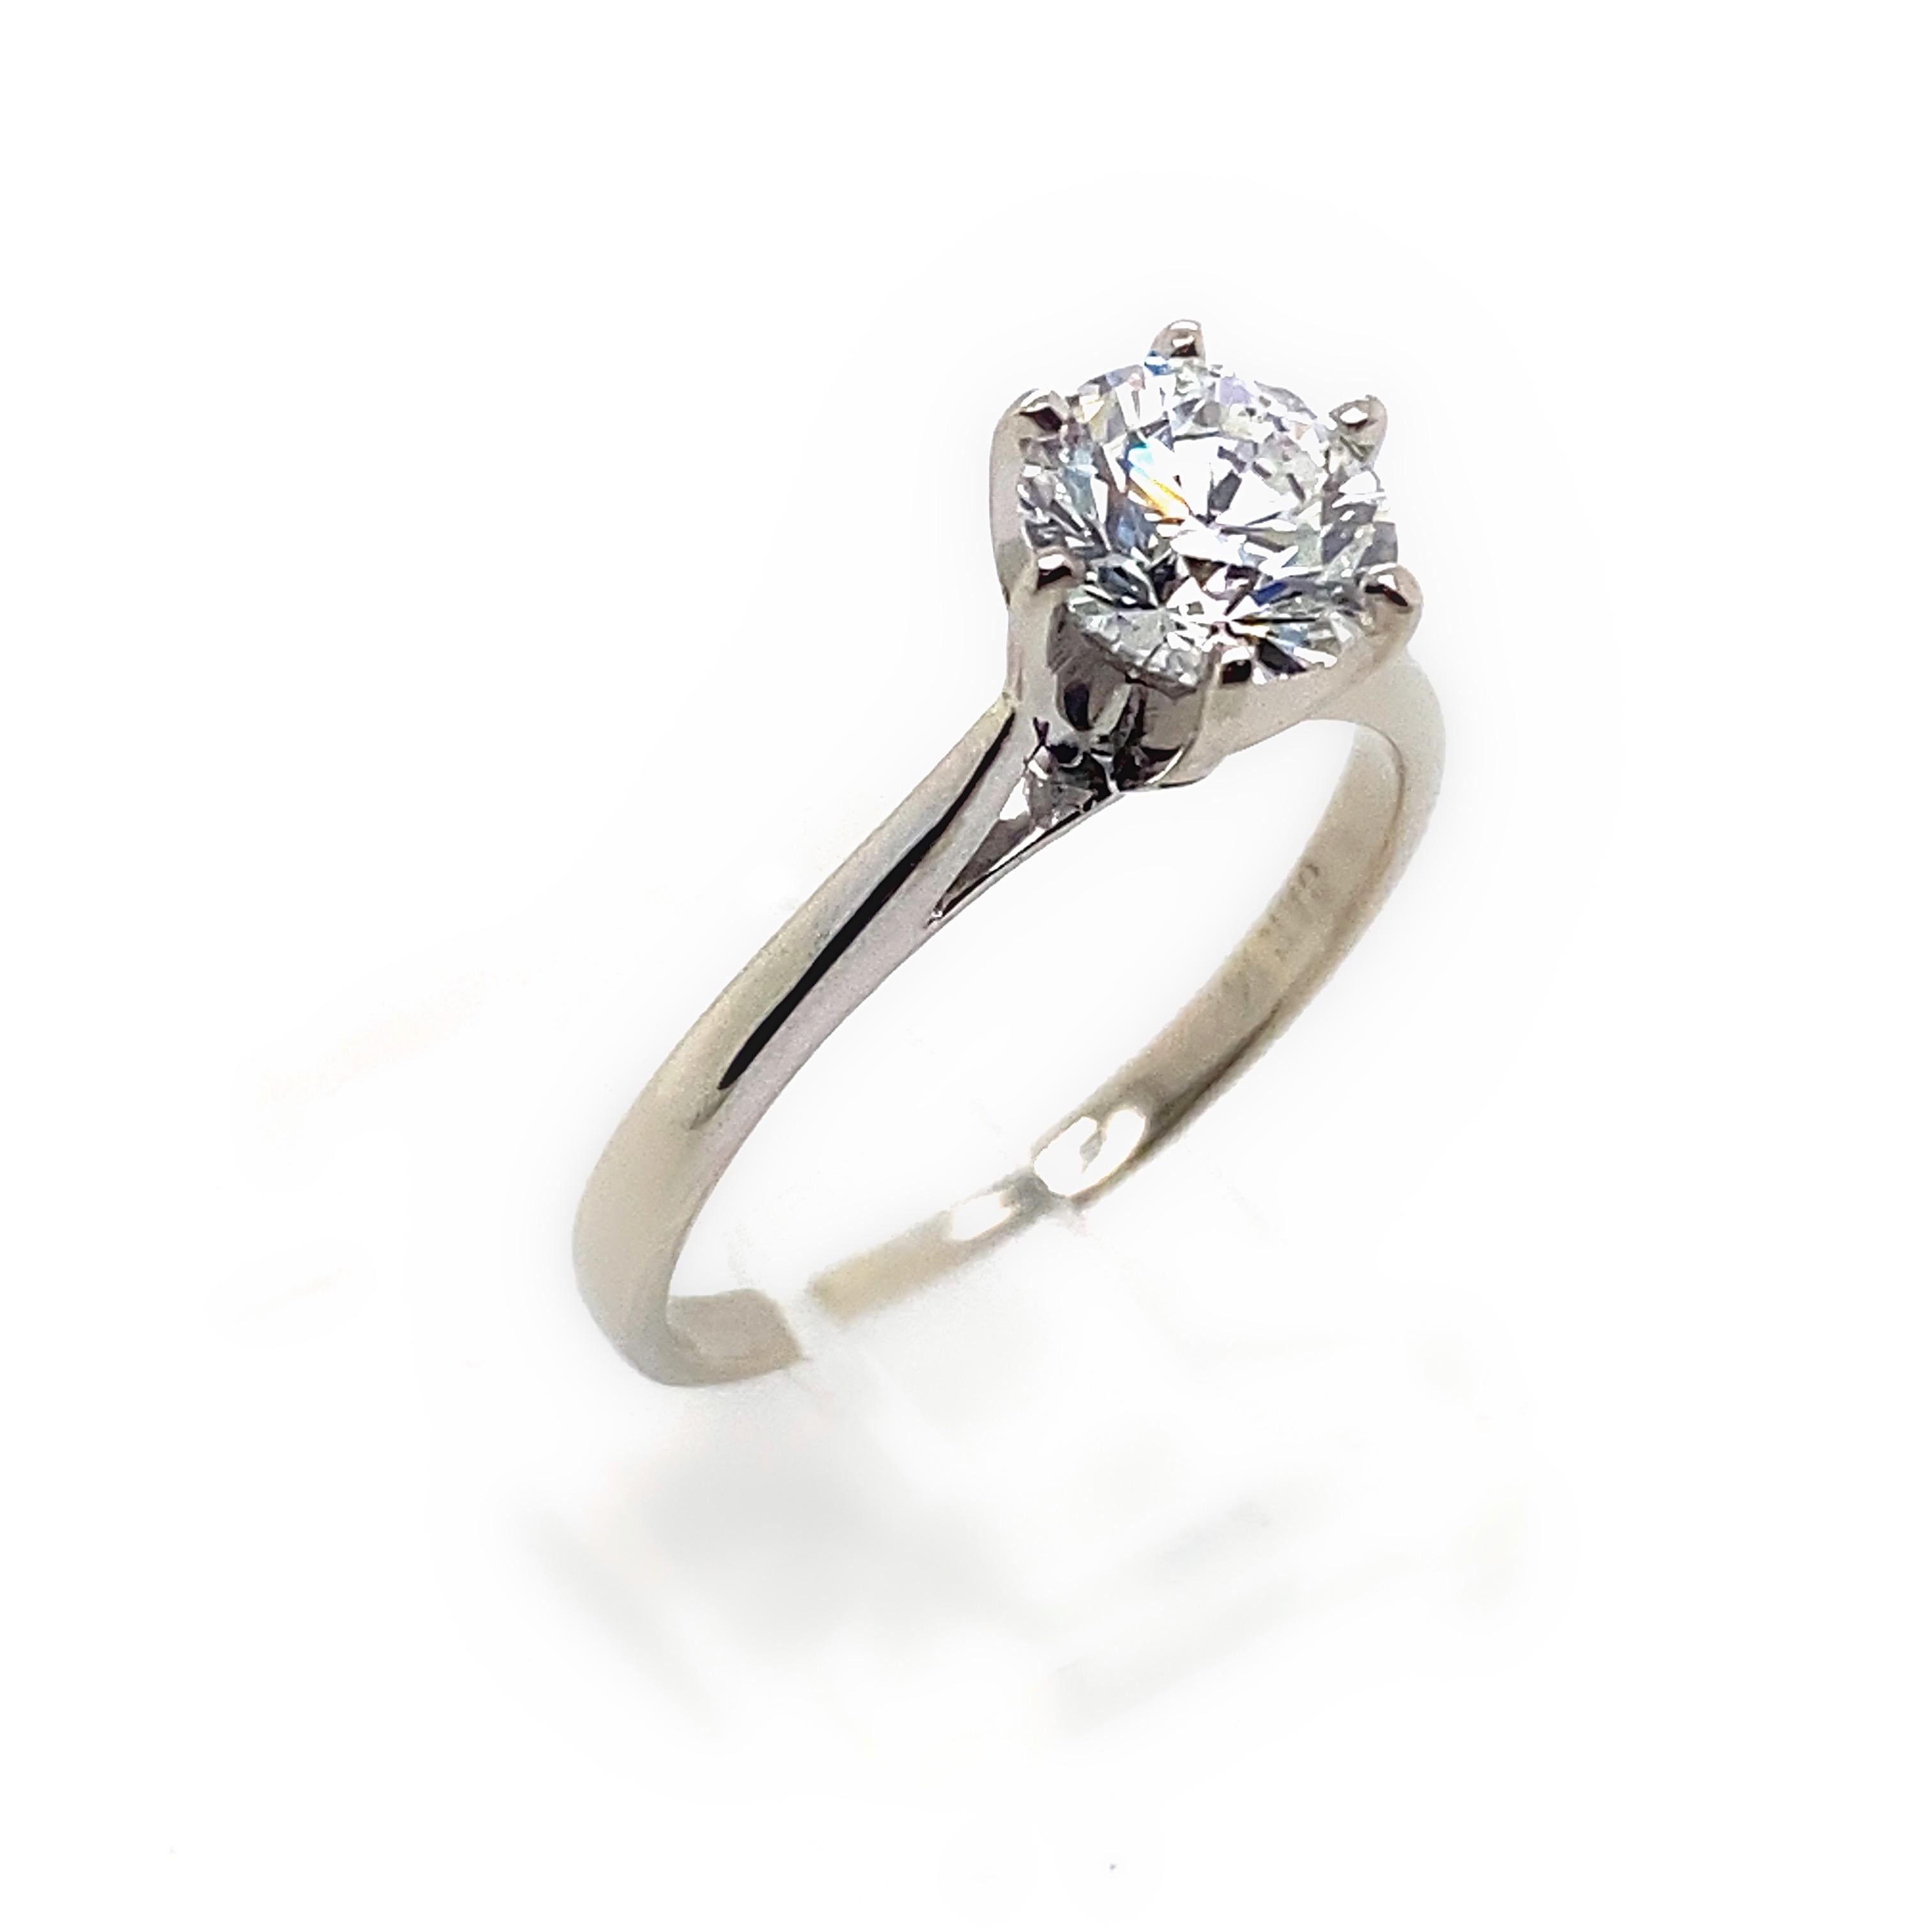 LAZARE KAPLAN Round Brilliant Diamond 1CT F VS1 Engagement Ring in 14kt WG GIA In Excellent Condition For Sale In San Diego, CA